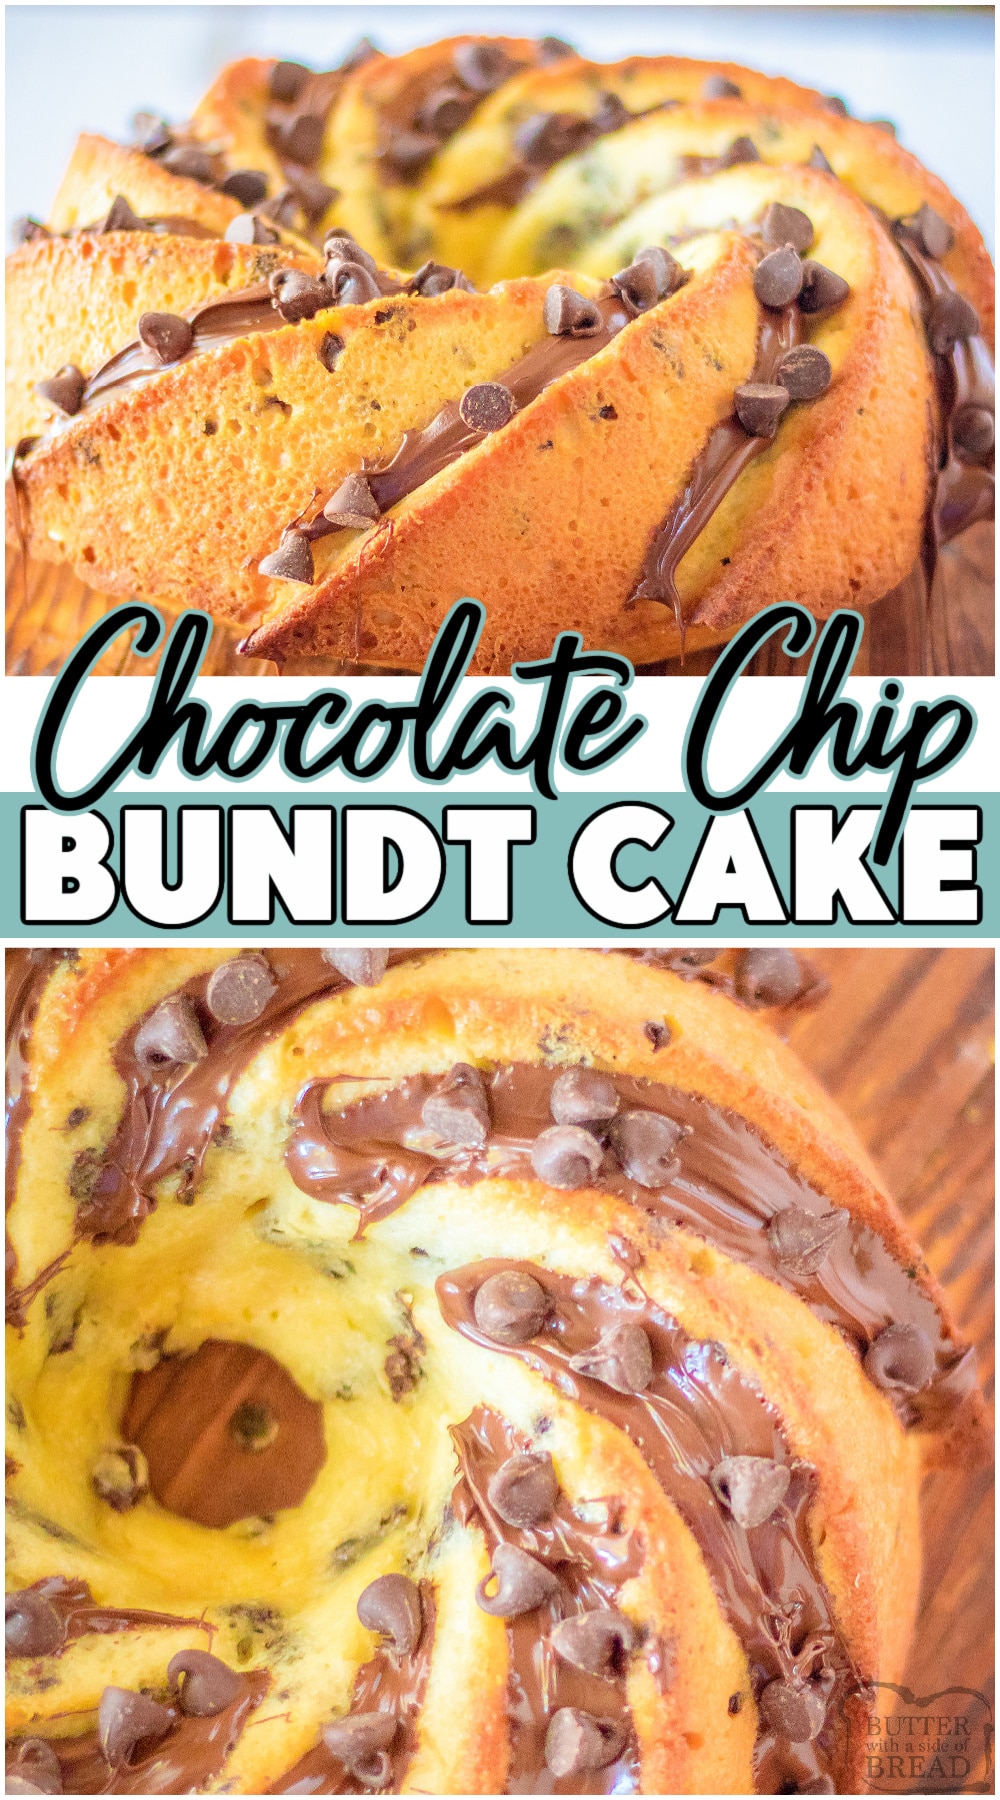 Fantastic Chocolate Chip Bundt Cake with a moist, tender crumb & incredible chocolate flavor! Homemade Bundt Cake recipe packed with chocolate chips inside and on top of the cake, perfect for anyone who loves chocolate. #bundt #cake #chocolate #chocolatechip #baking #easyrecipe #dessert from BUTTER WITH A SIDE OF BREAD